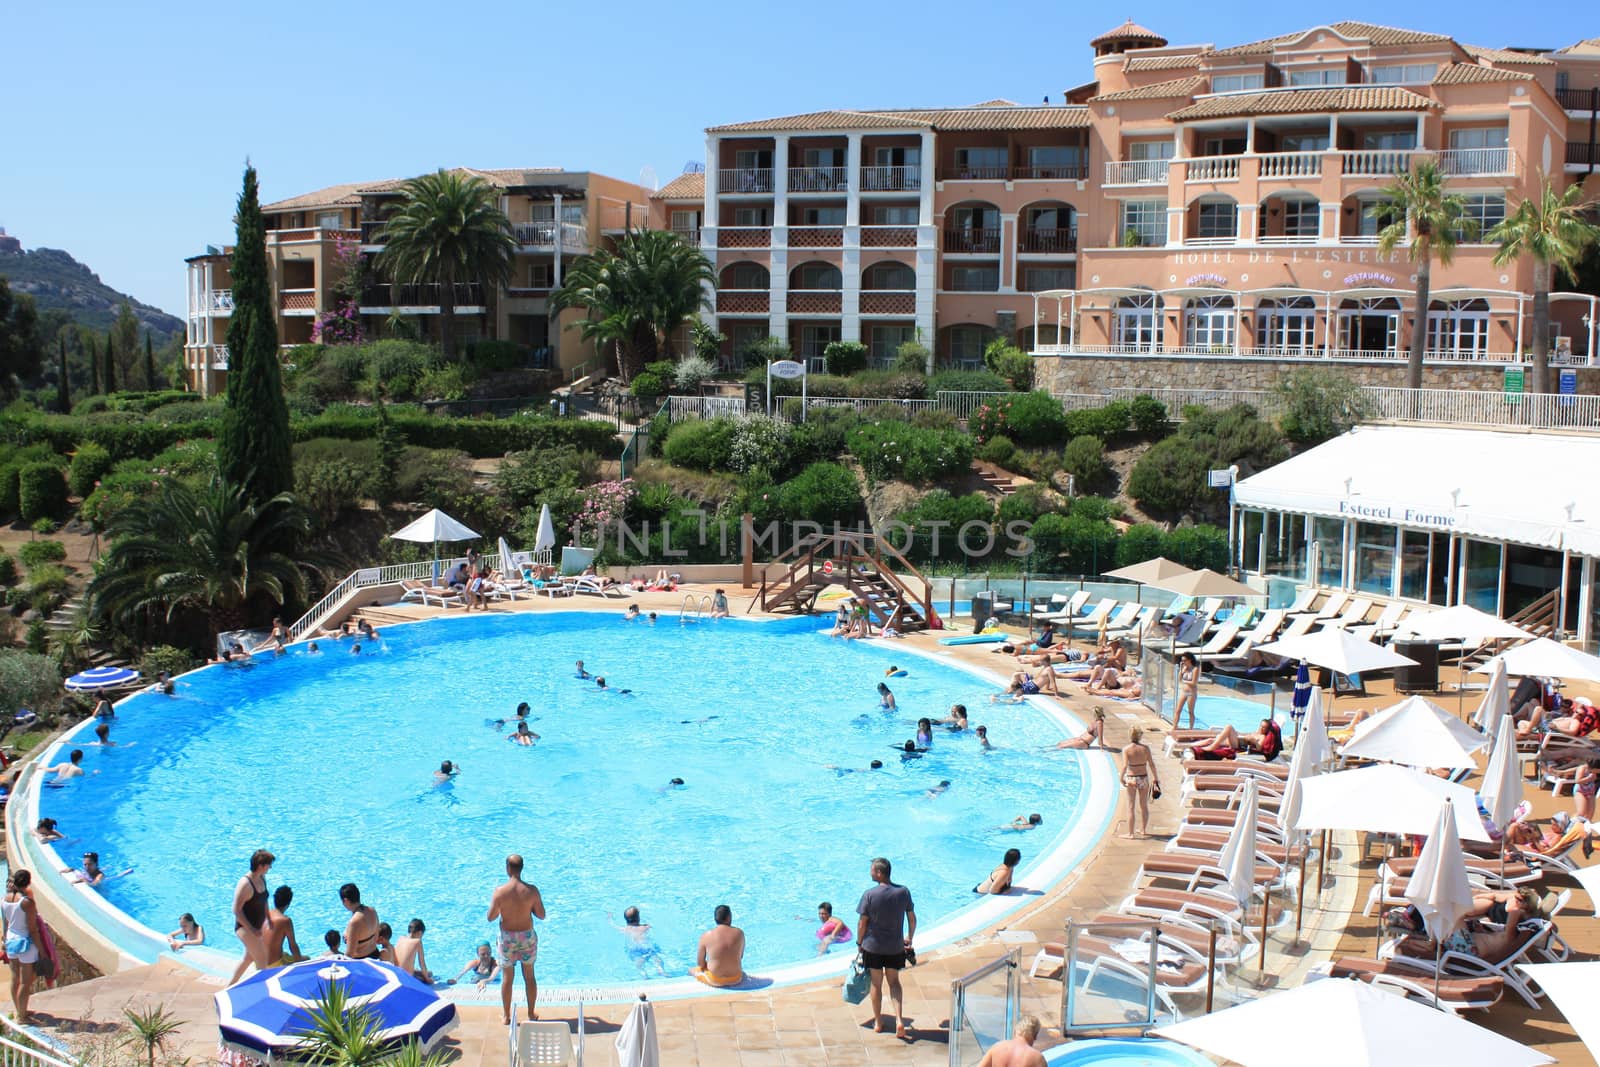 People swimming and getting tanned by a swimming pool  at a French hotel